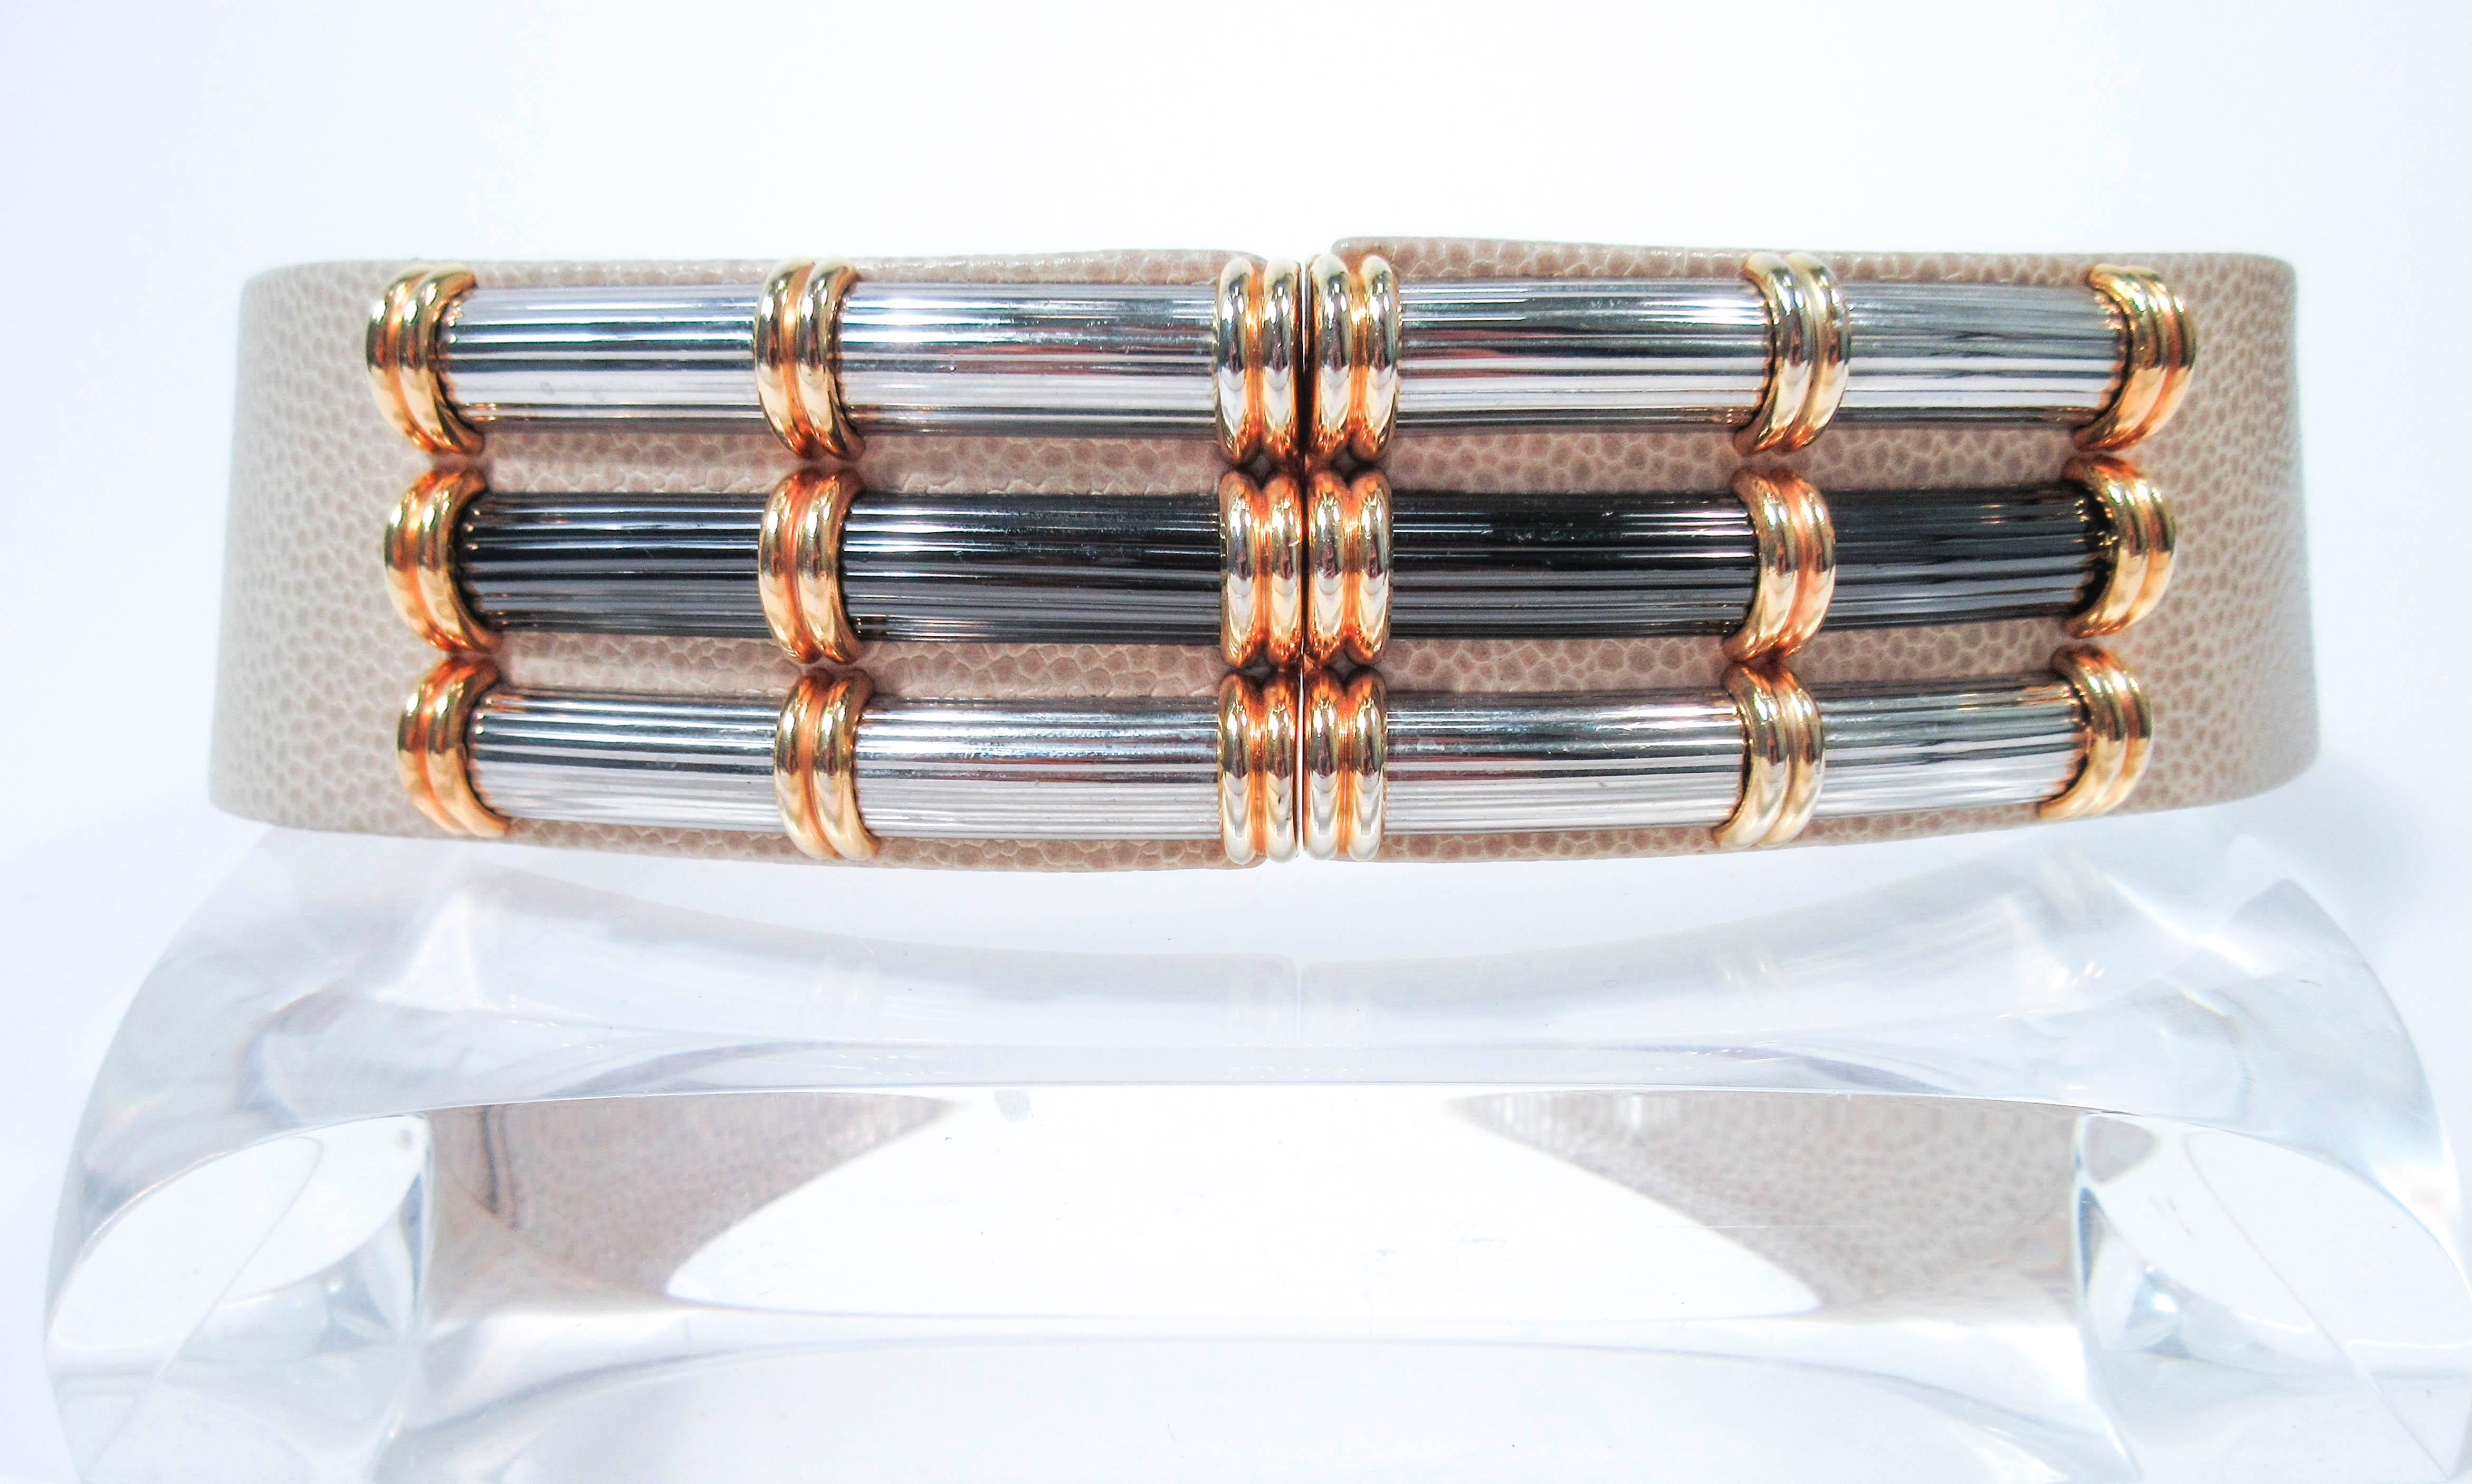 This Judith Leiber belt is composed of a nude lizard. Features an adjustable design with multi-metal buckle accent. In good vintage condition.
**Please cross-reference measurements for personal accuracy. Size in description box is an estimation.